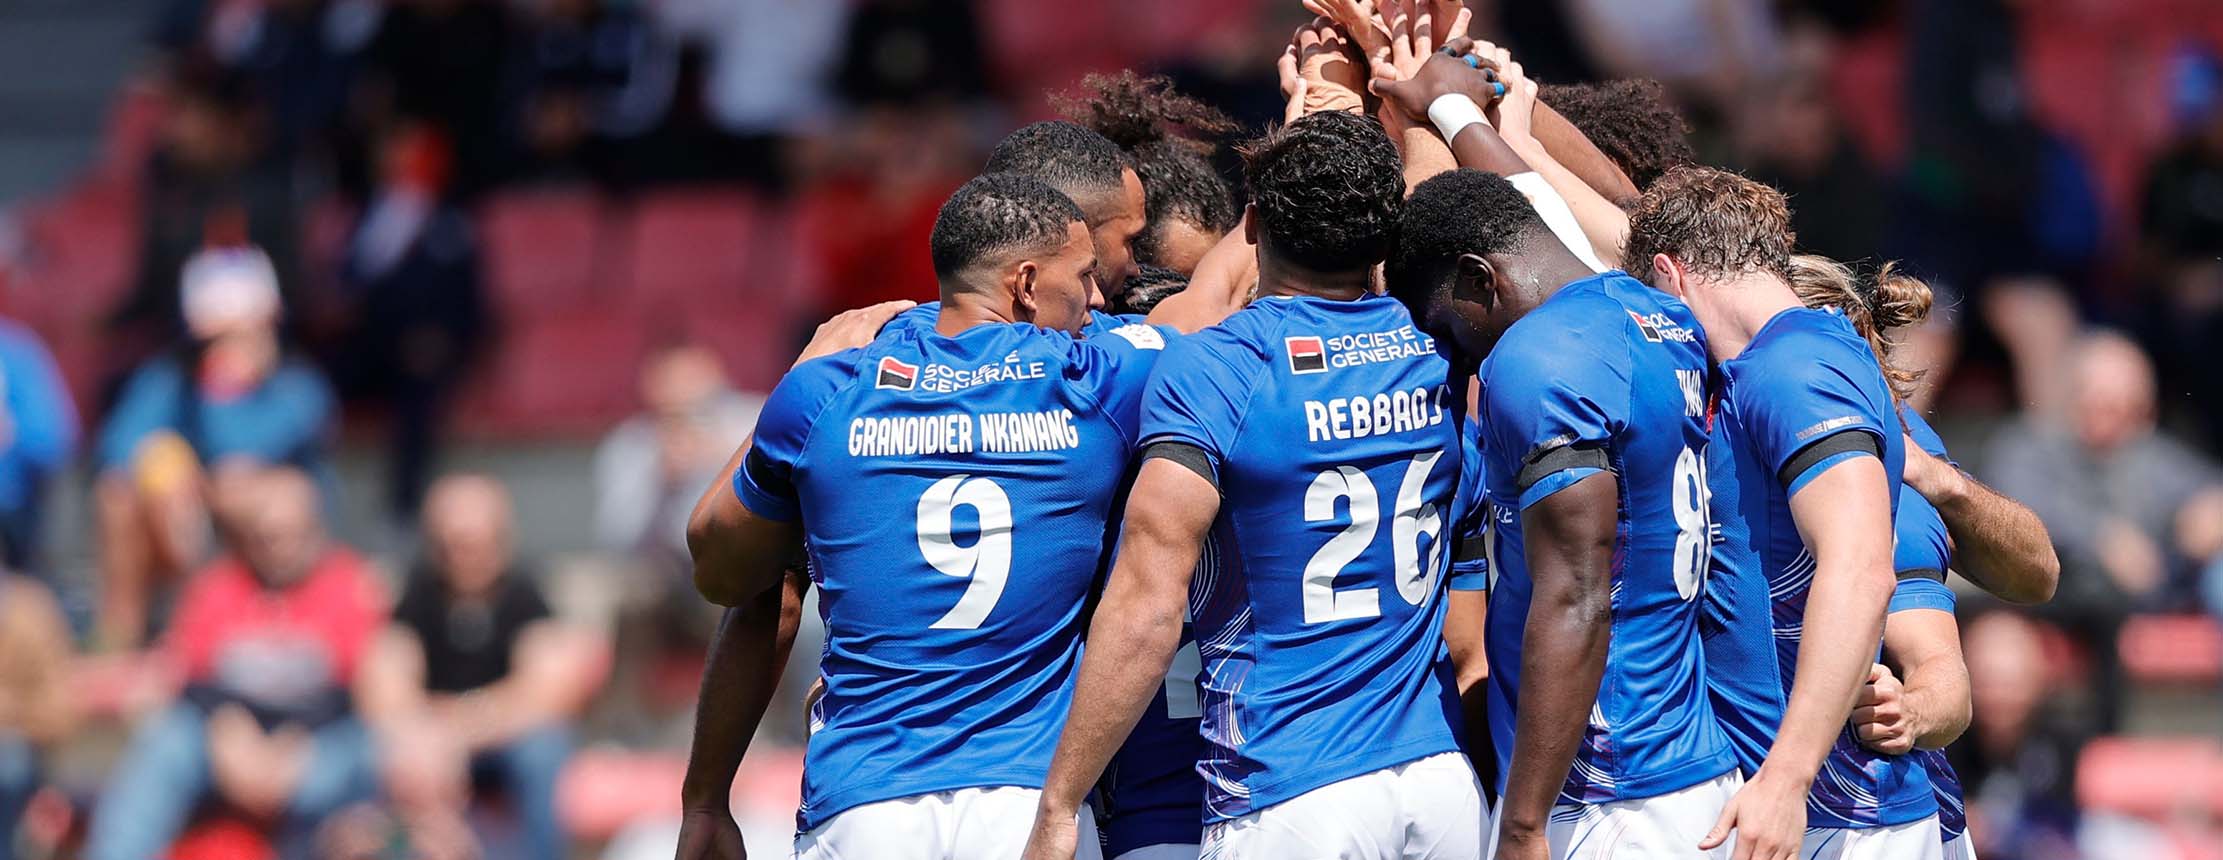 France team huddle before the game against south africa on day one of the hsbc france sevens at stade toulousain on 12 may, 2023 in toulouse, france